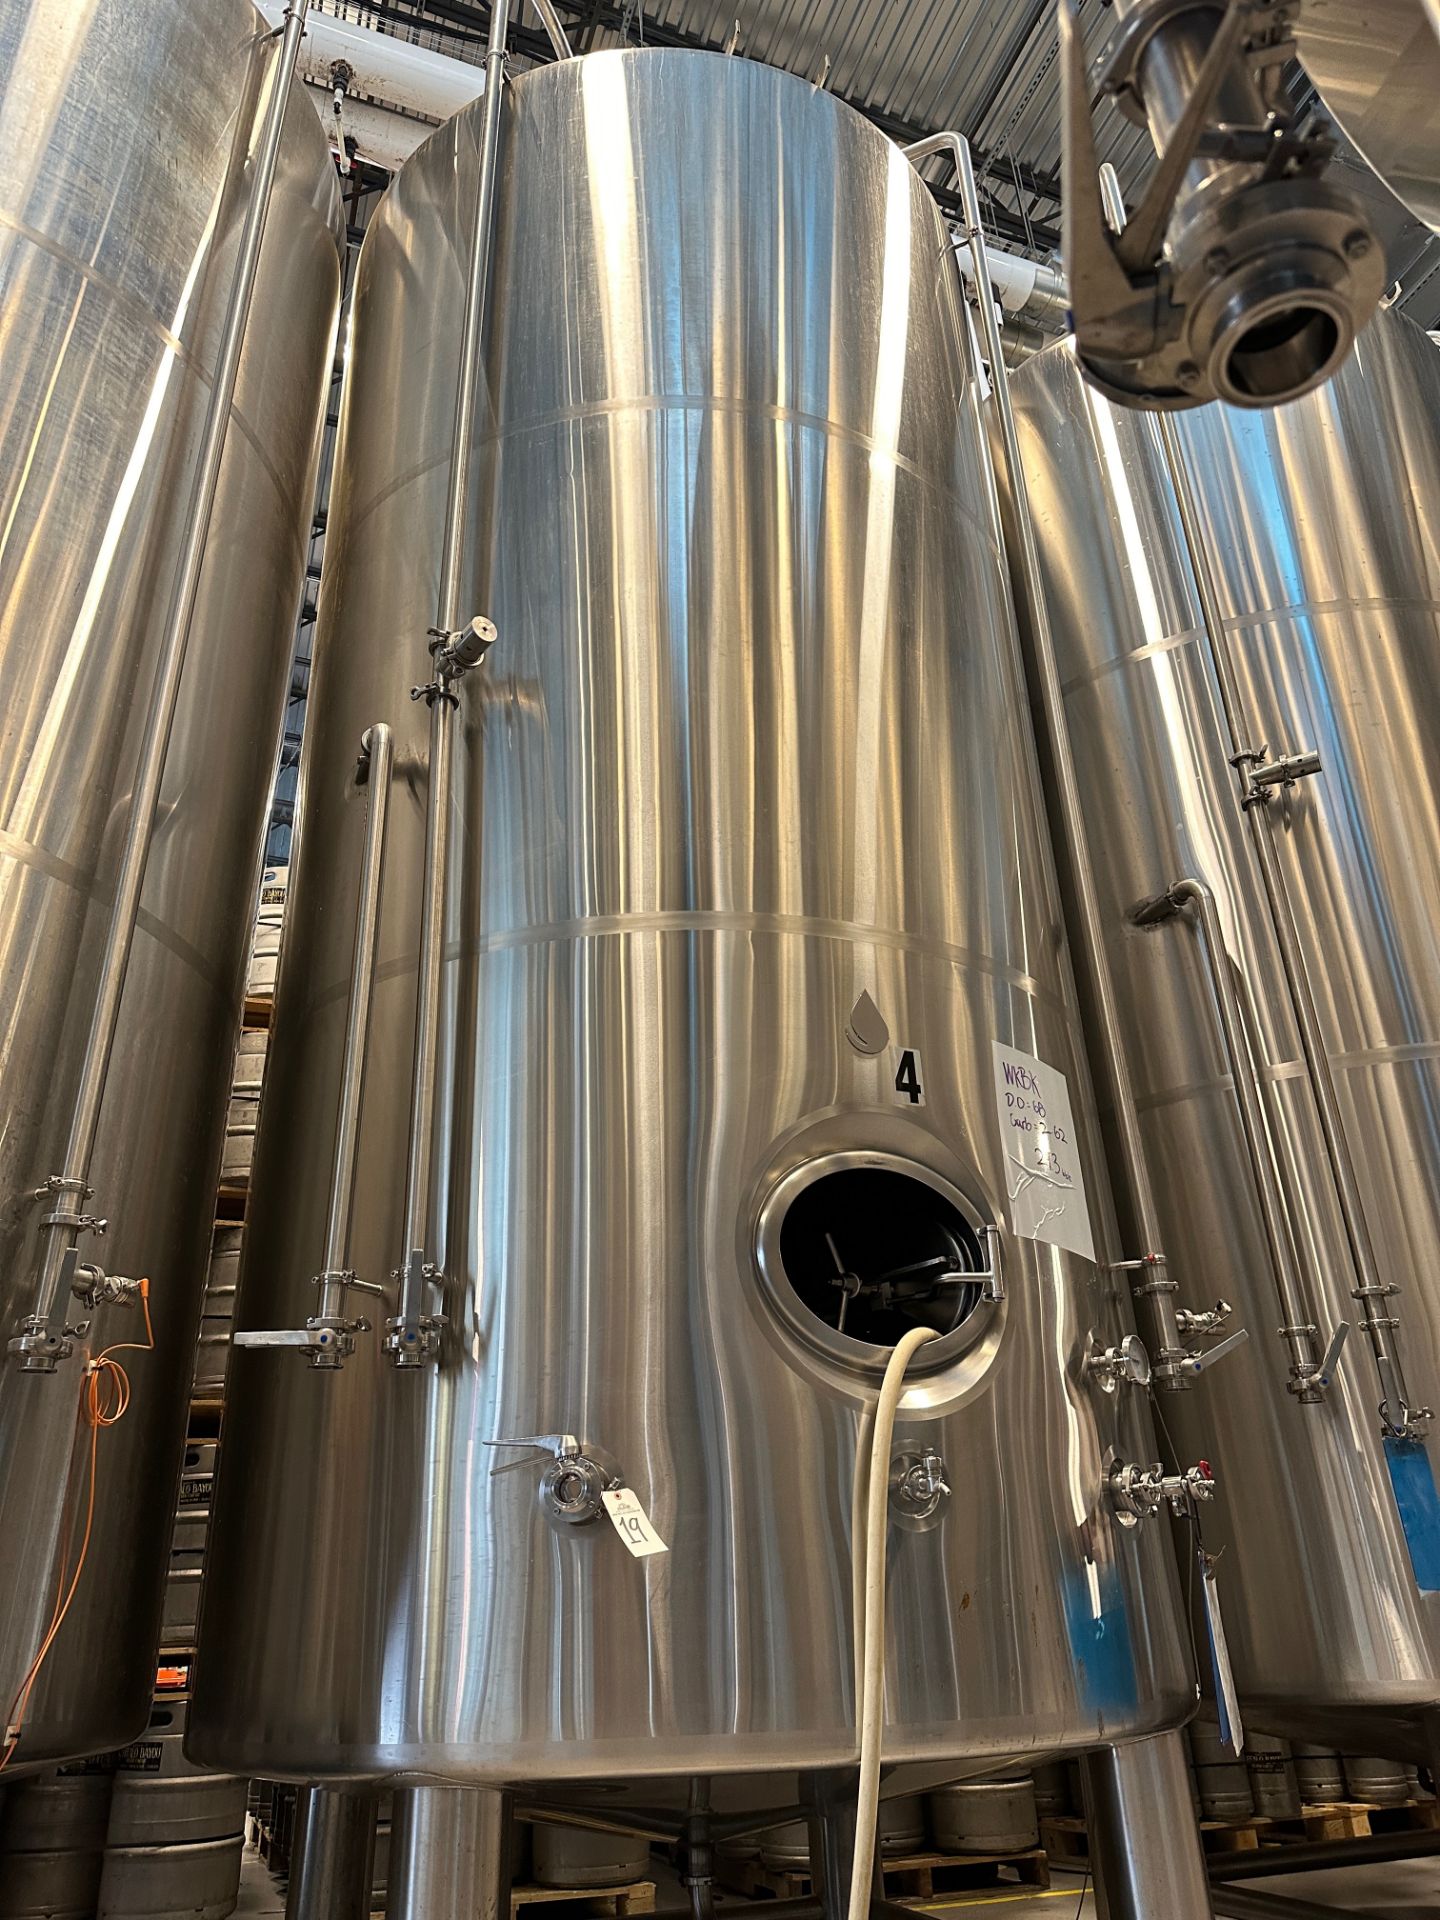 Complete 40 BBL Microbrewery - 40 BBL Deutsche 4-Vessel Brewhouse, Tanks, Can Line - See Description - Image 45 of 335